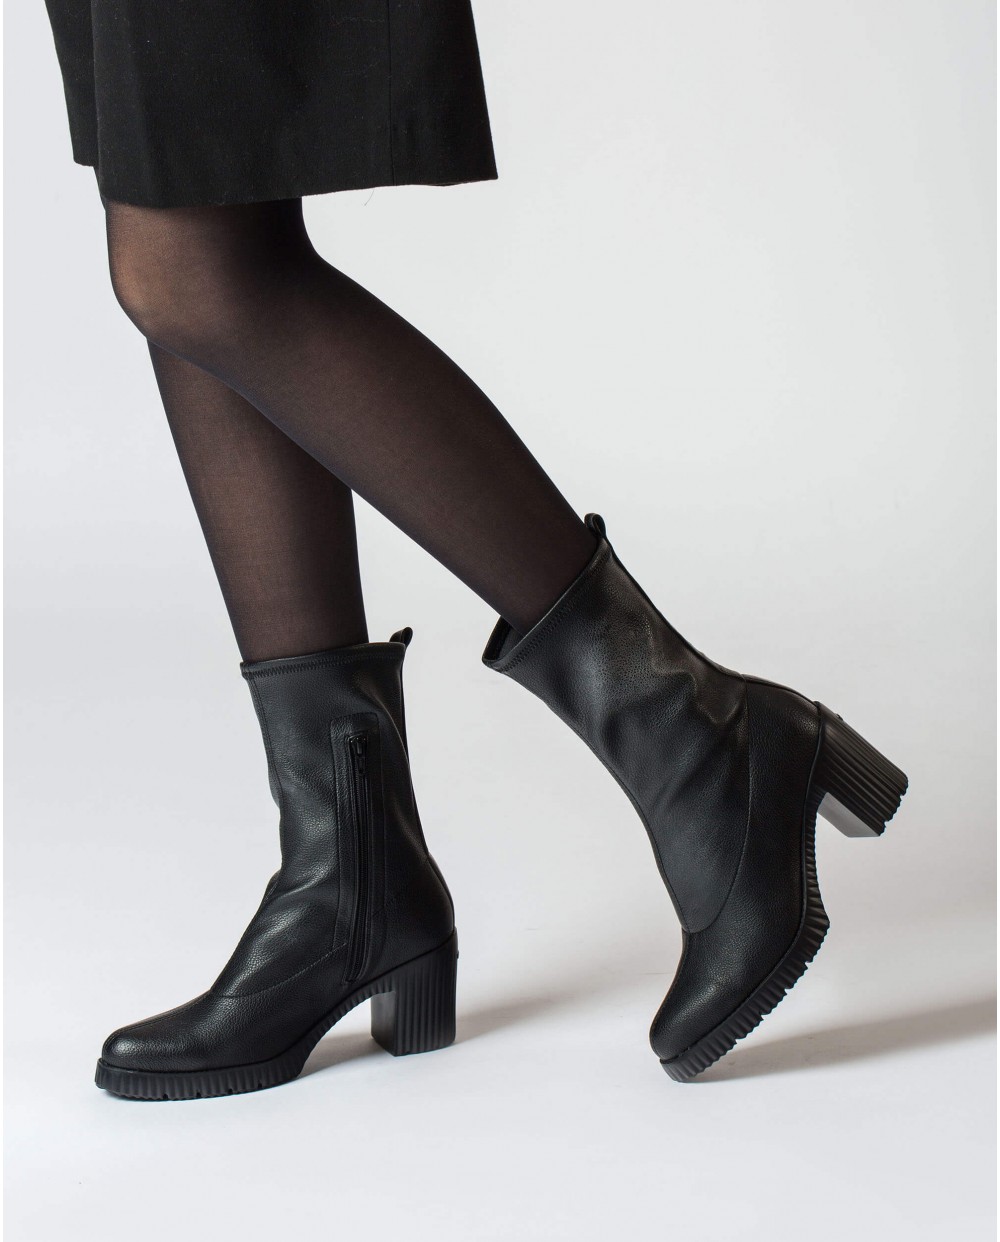 Wonders-Ankle Boots-Black ankle boot Moi